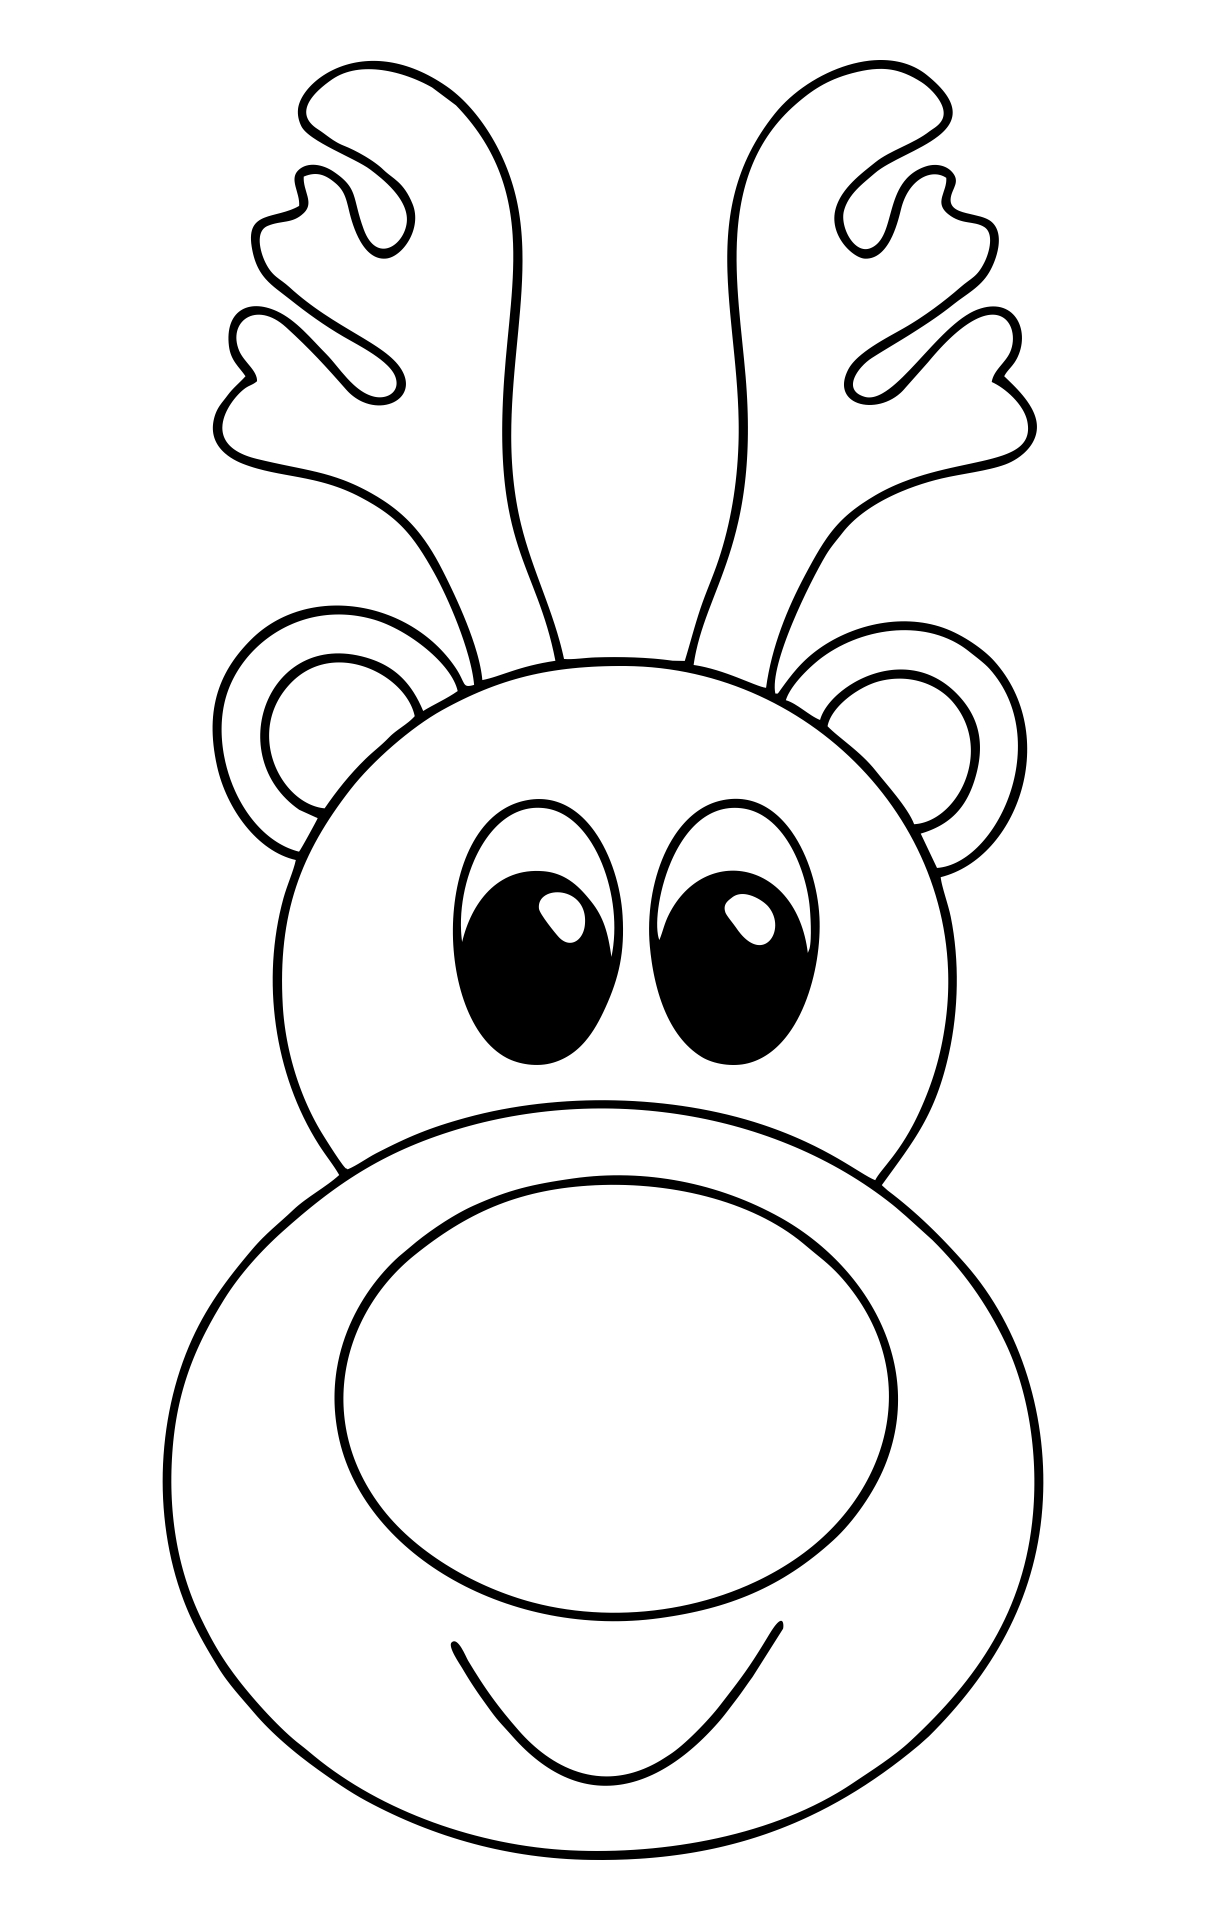 free-printable-reindeer-face-template-printable-word-searches